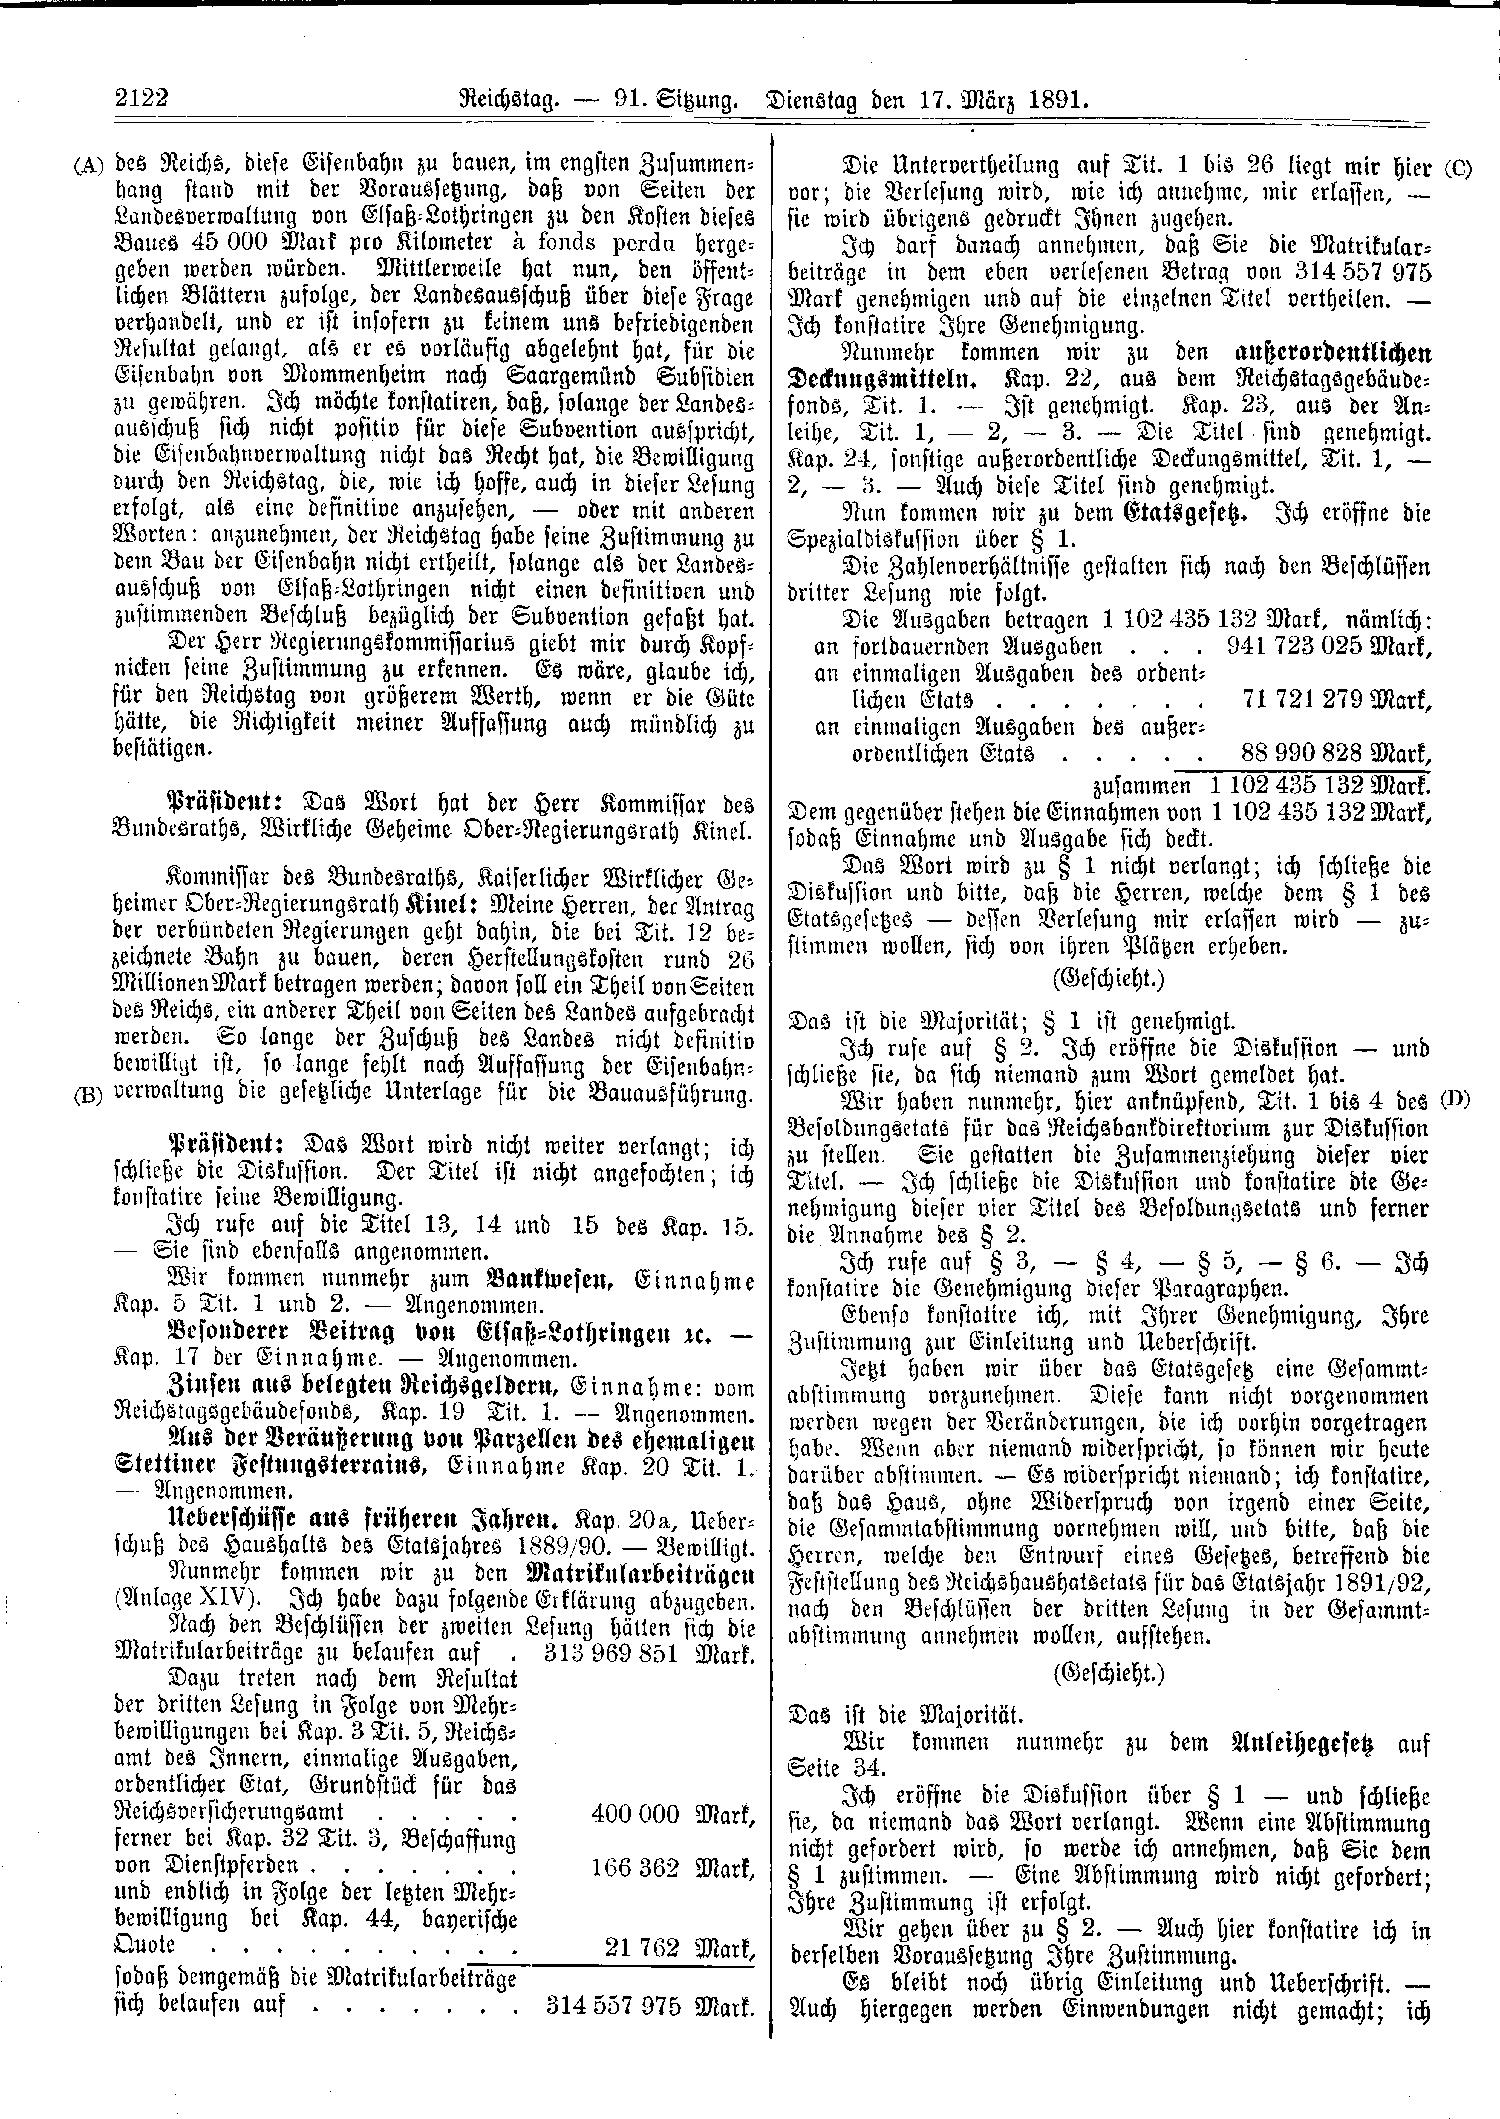 Scan of page 2122